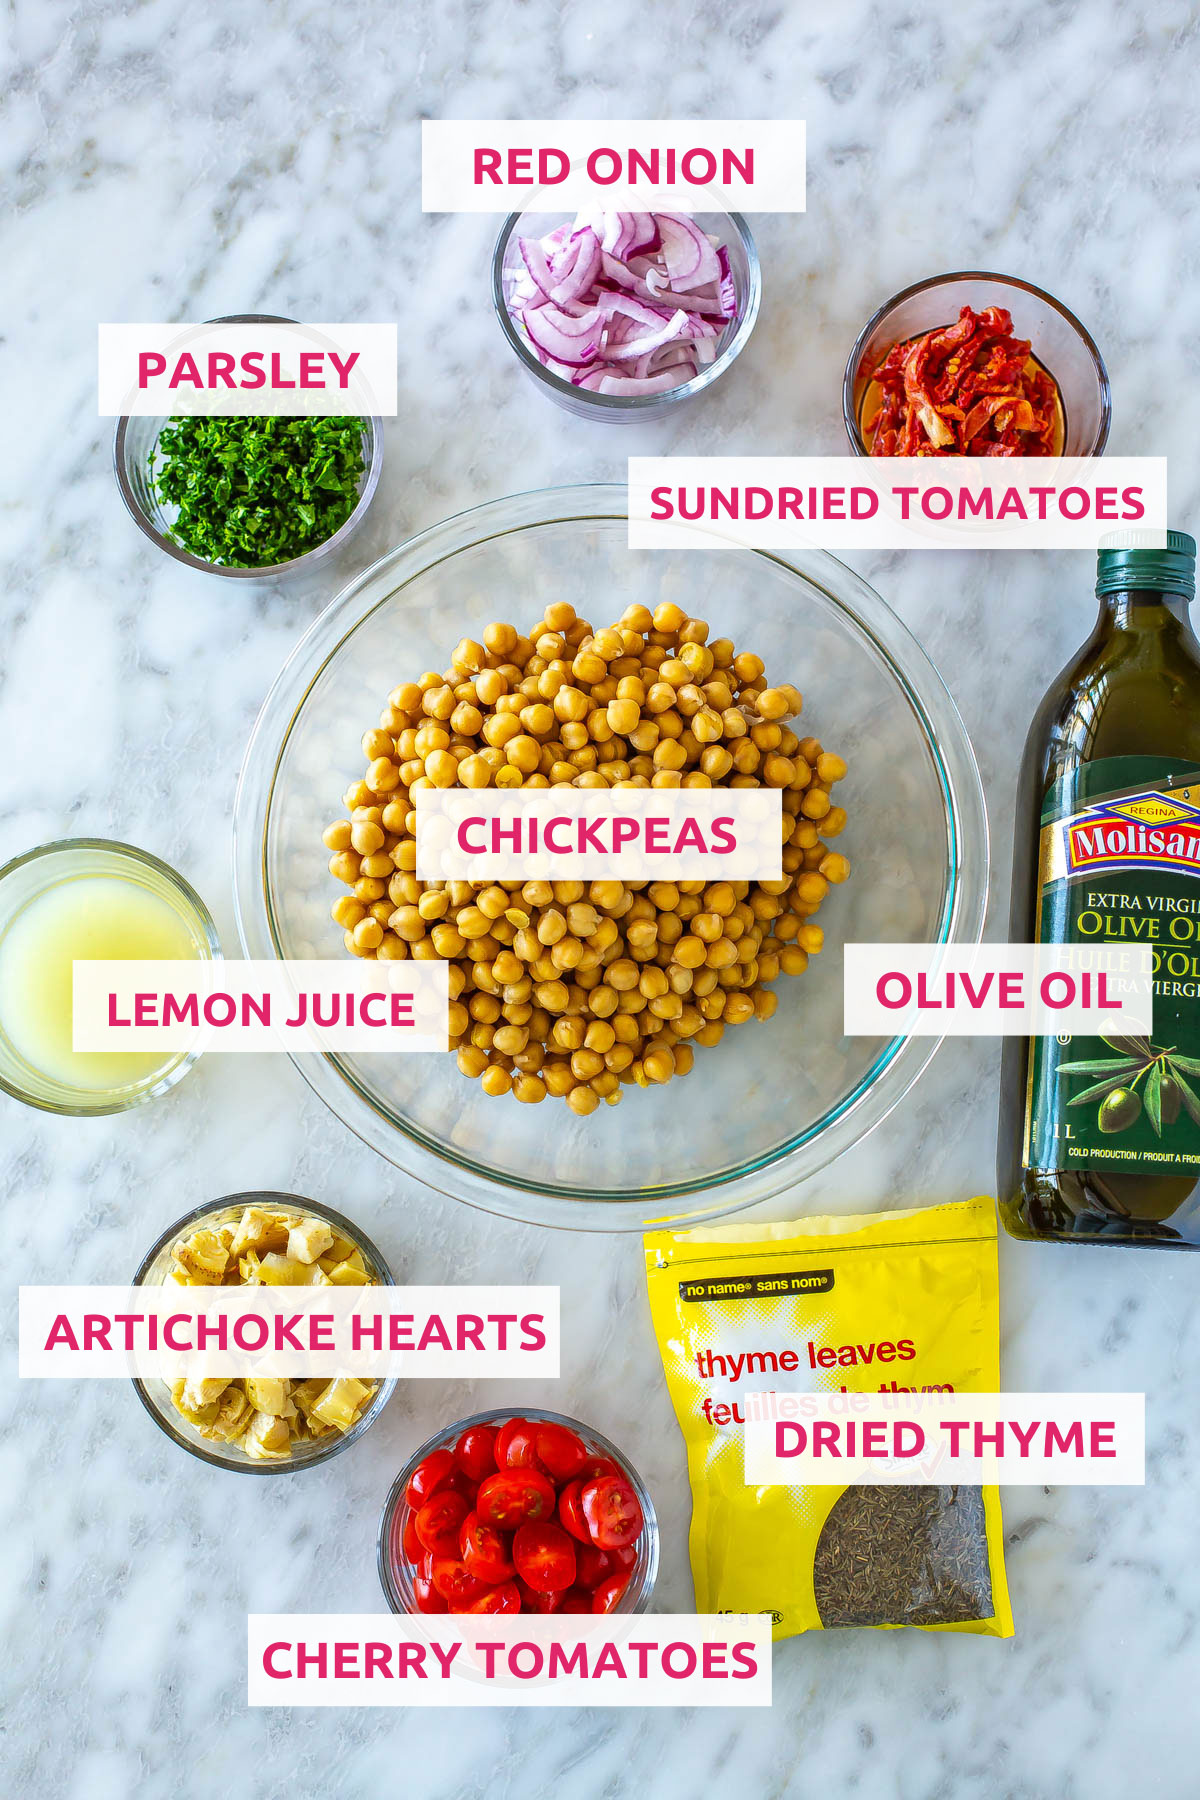 Ingredients for Mediterranean chickpea salad jars: chickpeas, olive oil, red onion, parsley, sundried tomatoes, lemon juice, artichoke hearts, cherry tomatoes and dried thyme.